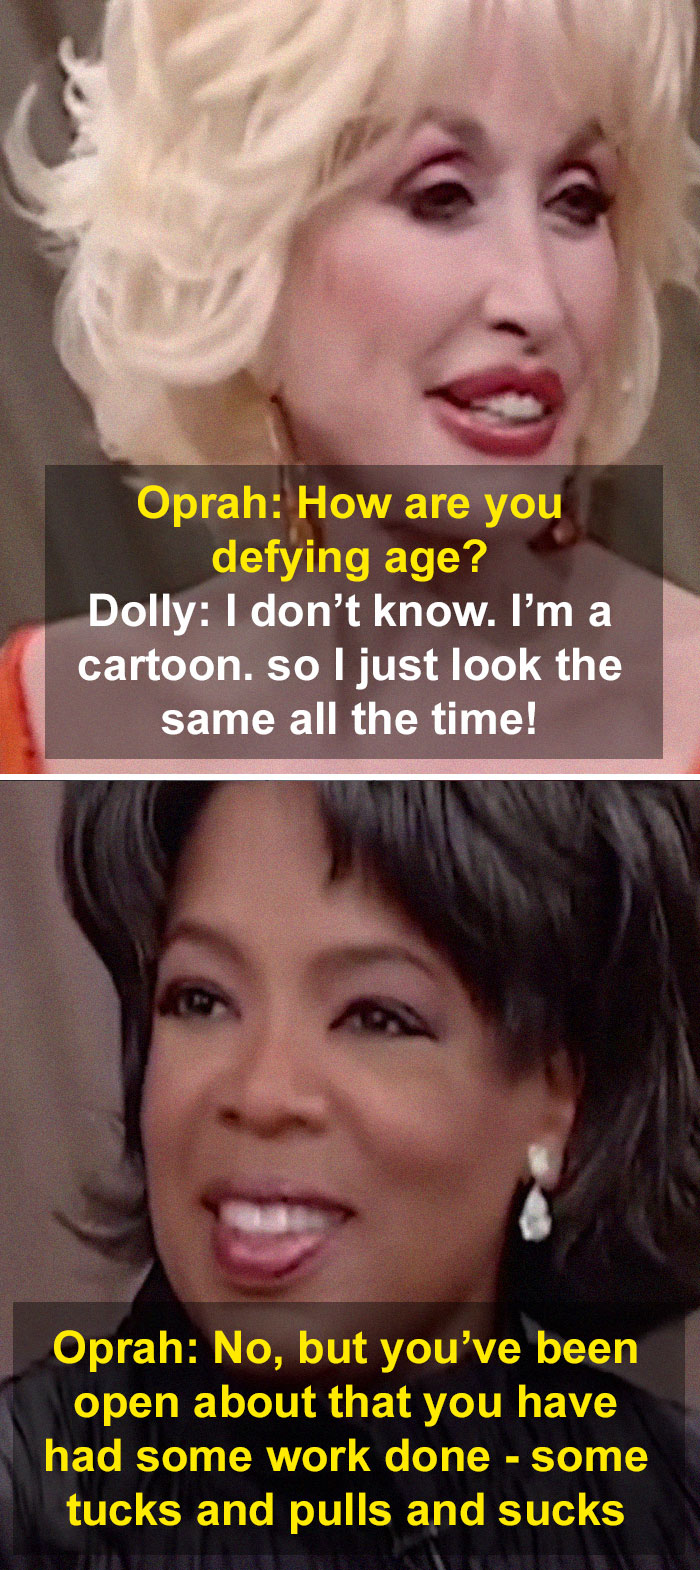 In 2003, Oprah Pressured Dolly Parton To Reveal What Kind Of Cosmetic Surgery She'd Had Done